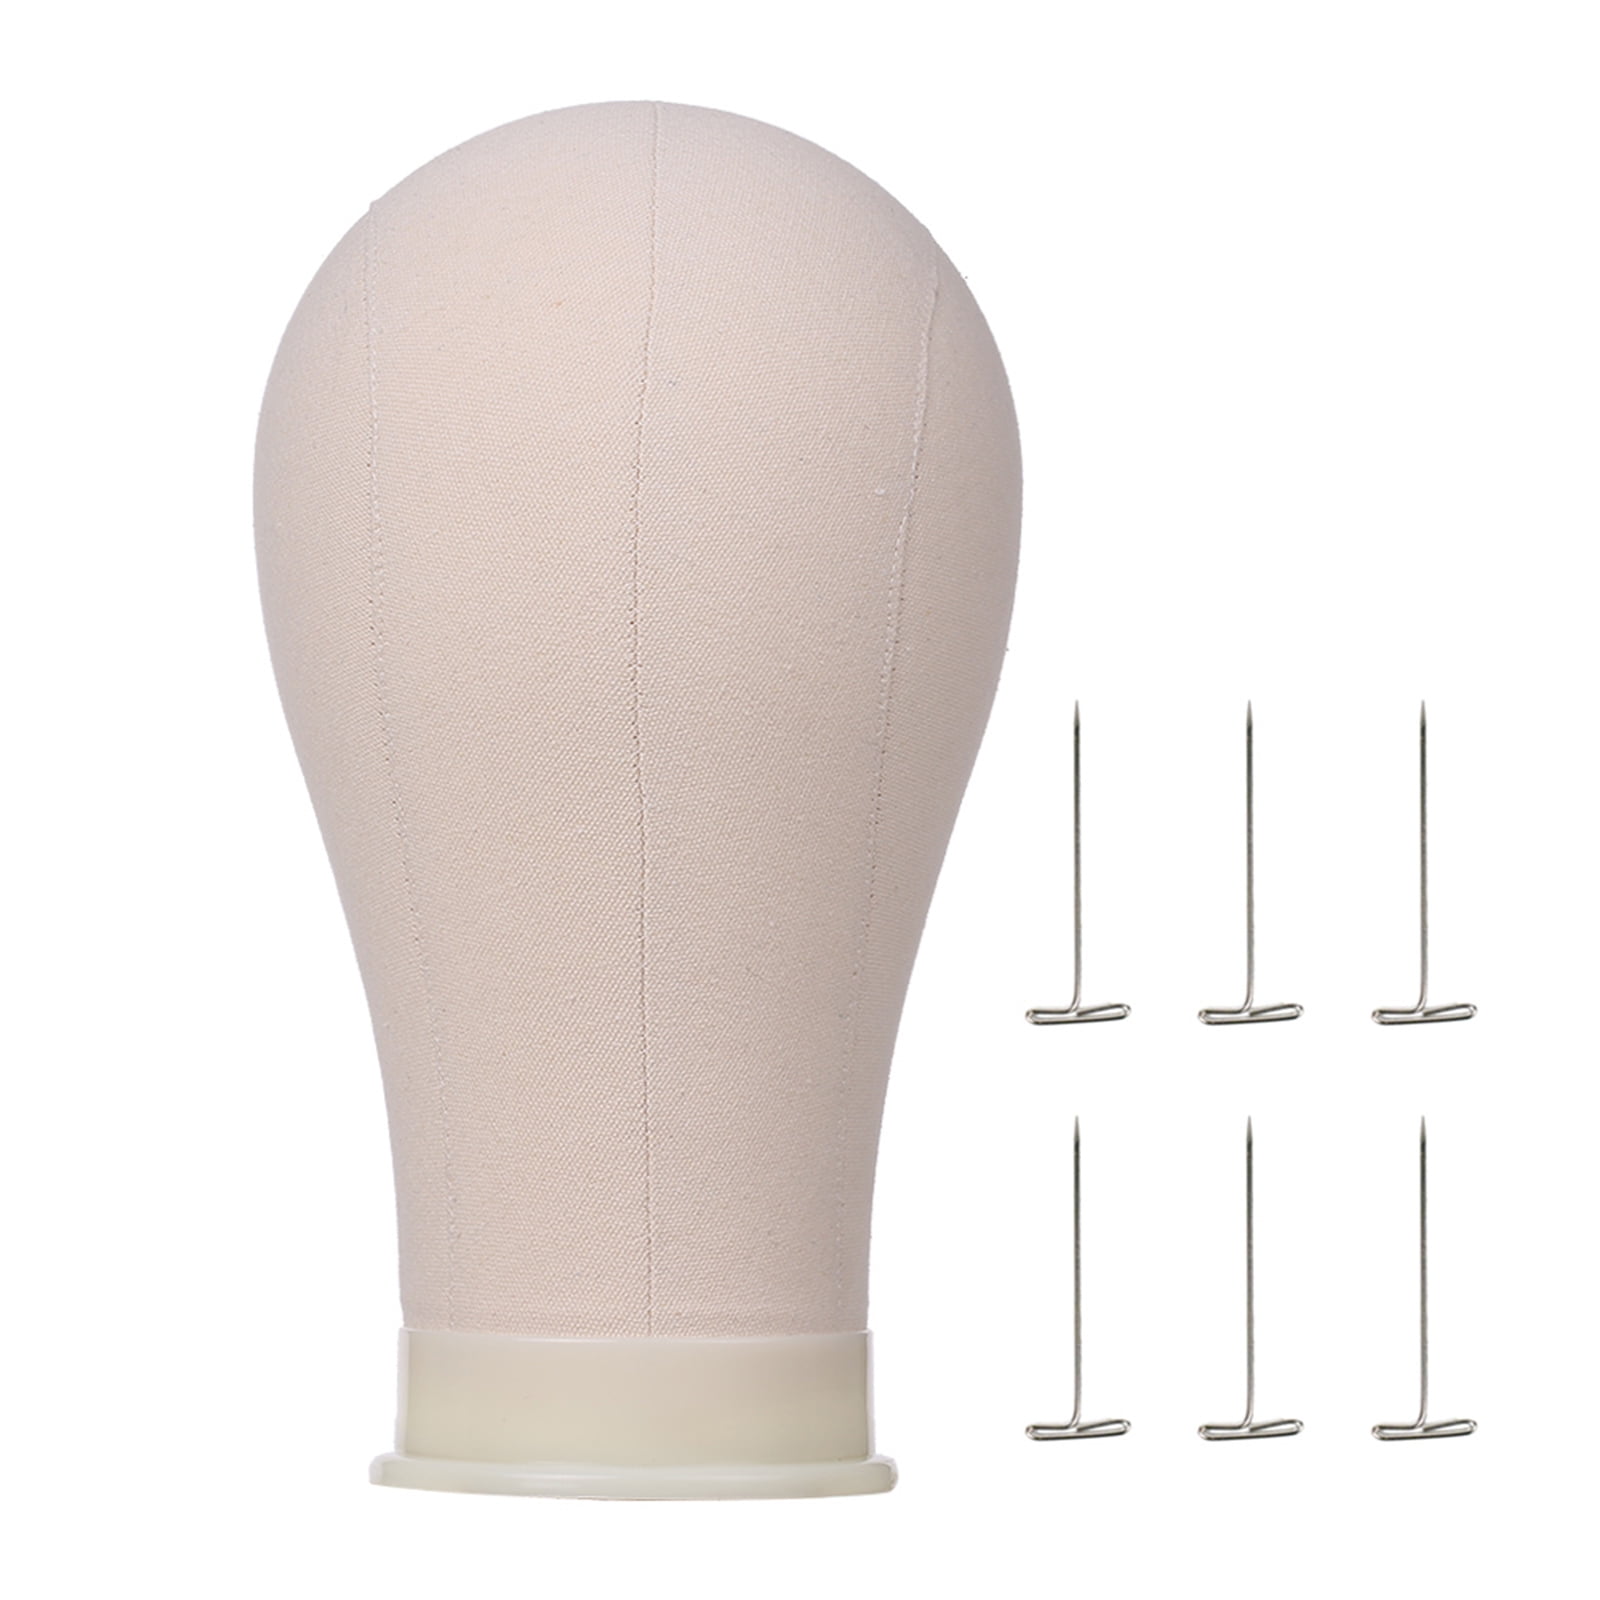 Unisex Canvas Block Mannequin Head,Fabric Head Form for Wig Making